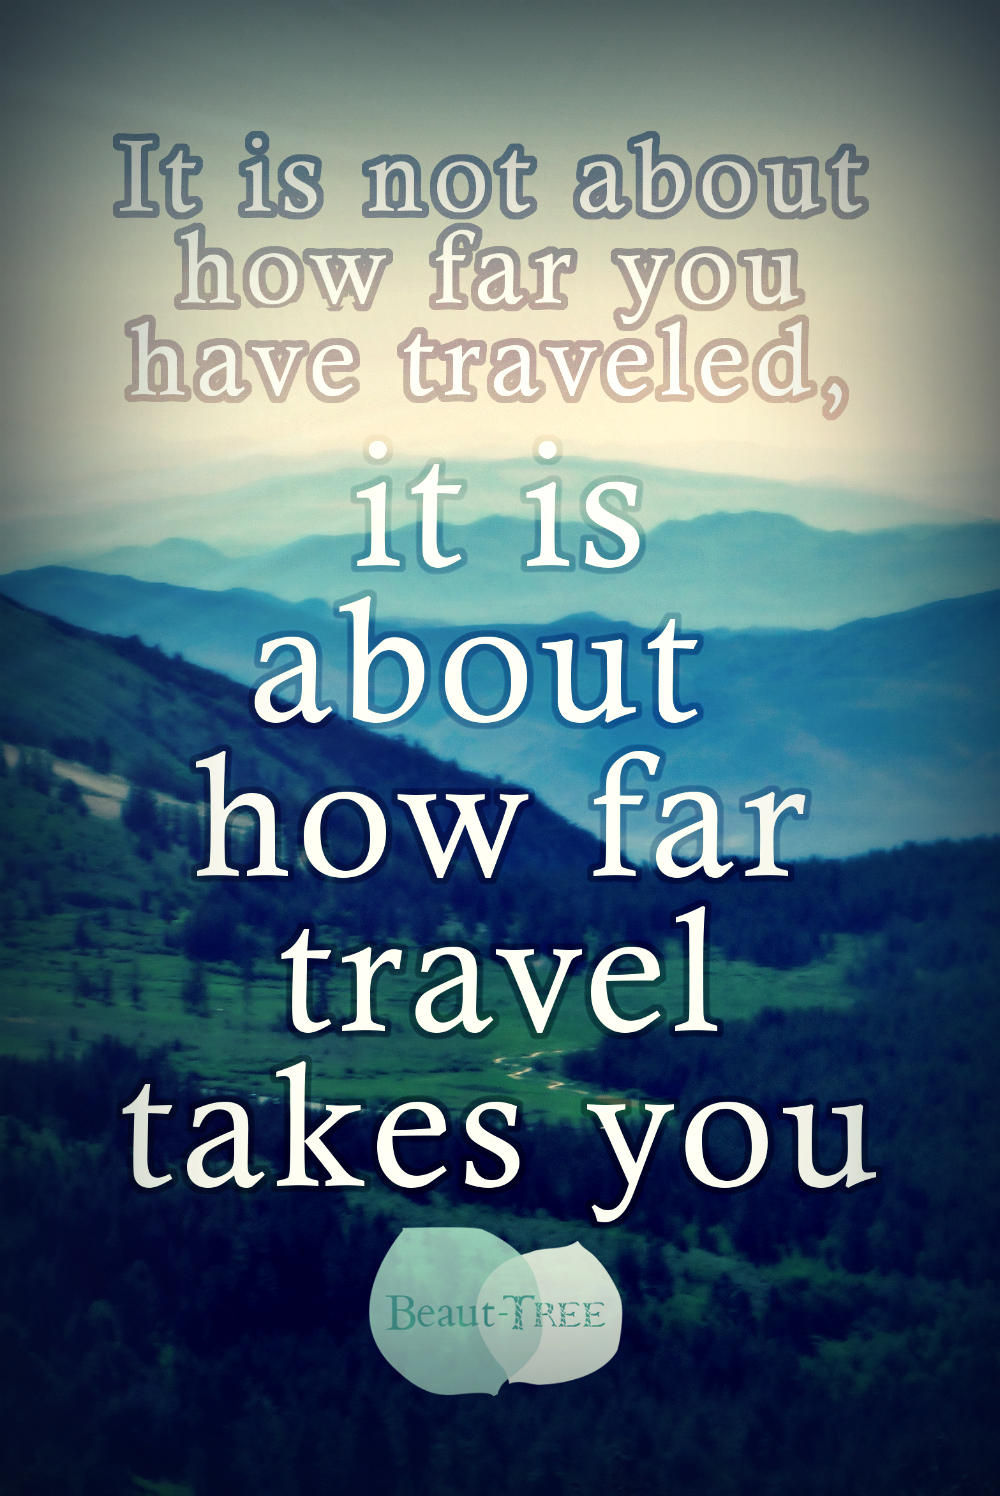 It is not about how far you have traveled, it is about how far travel takes you.